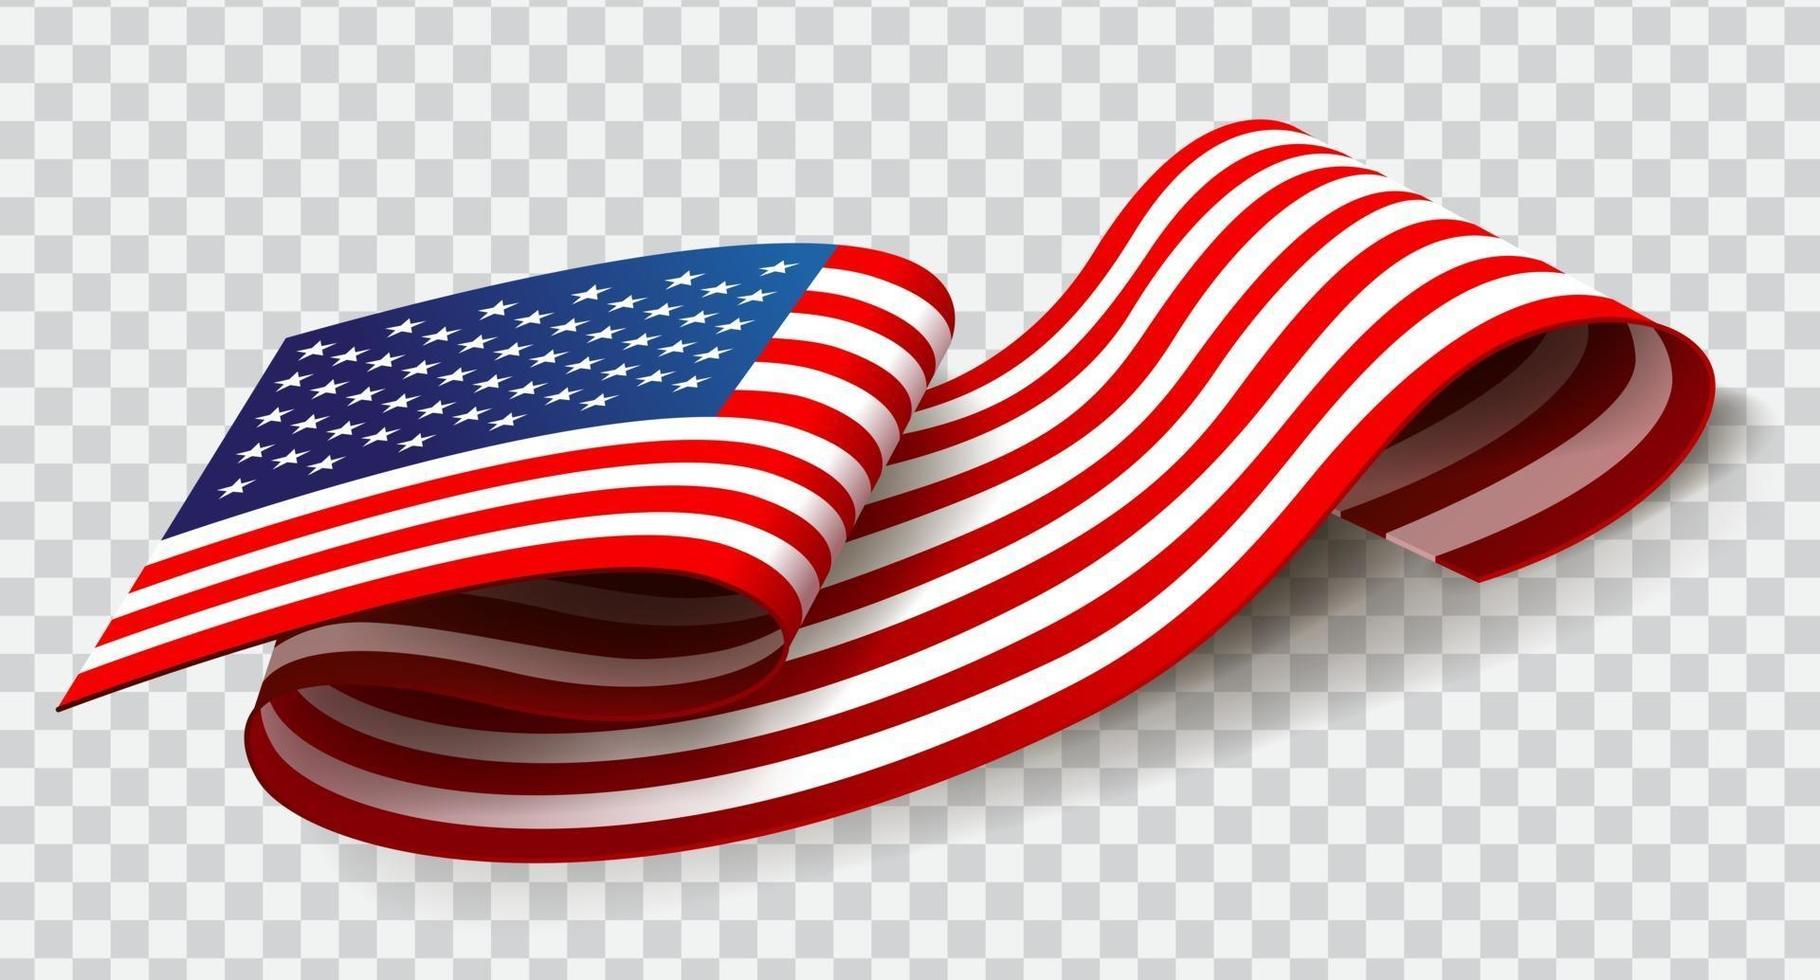 United States Of America Waving Flag On Transparent Background For 4th